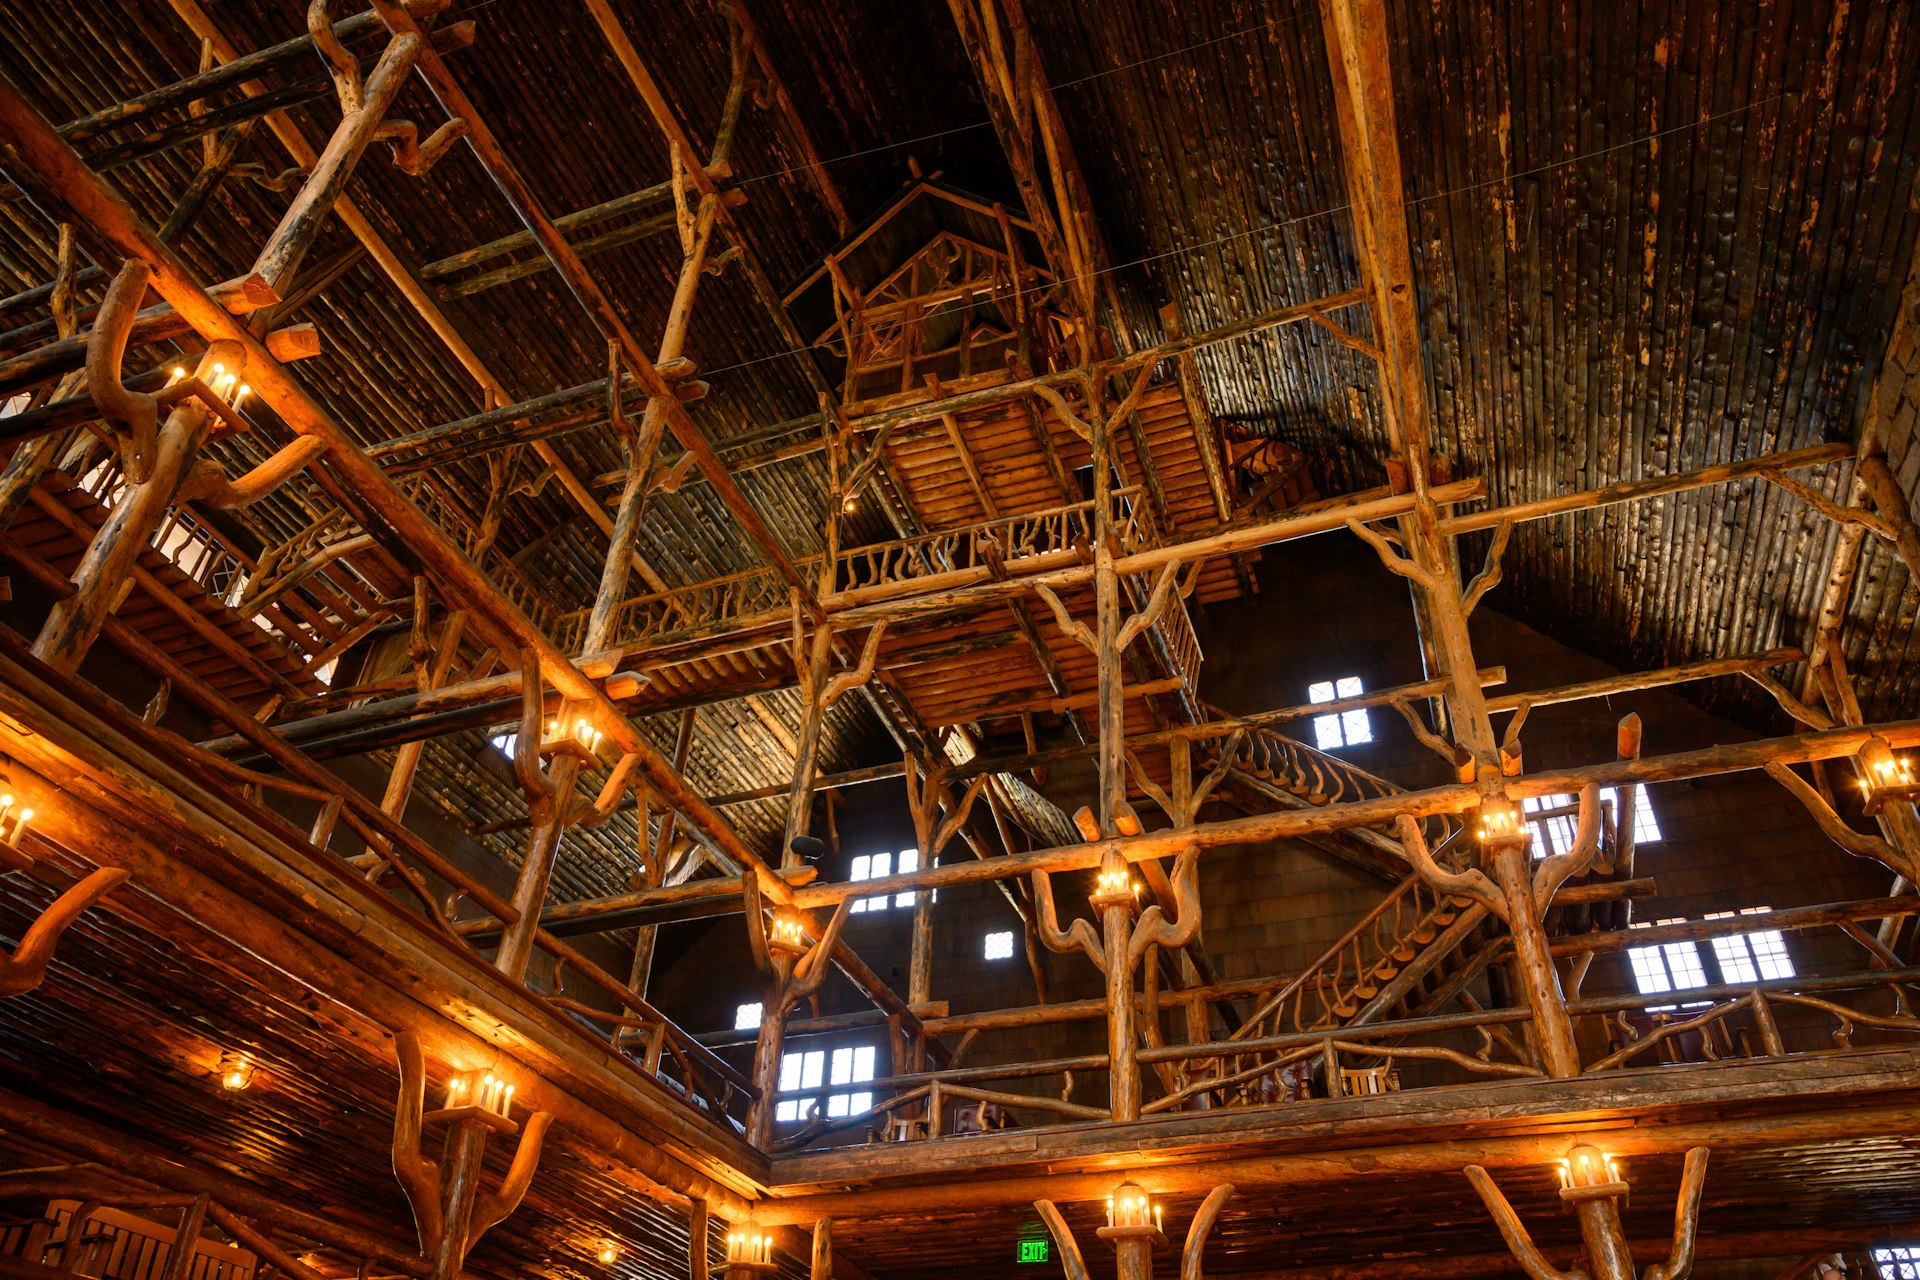 Wooden beams made from logs in the grand hall of Old Faithful Inn, Yellowstone National Park, Wyoming, USA